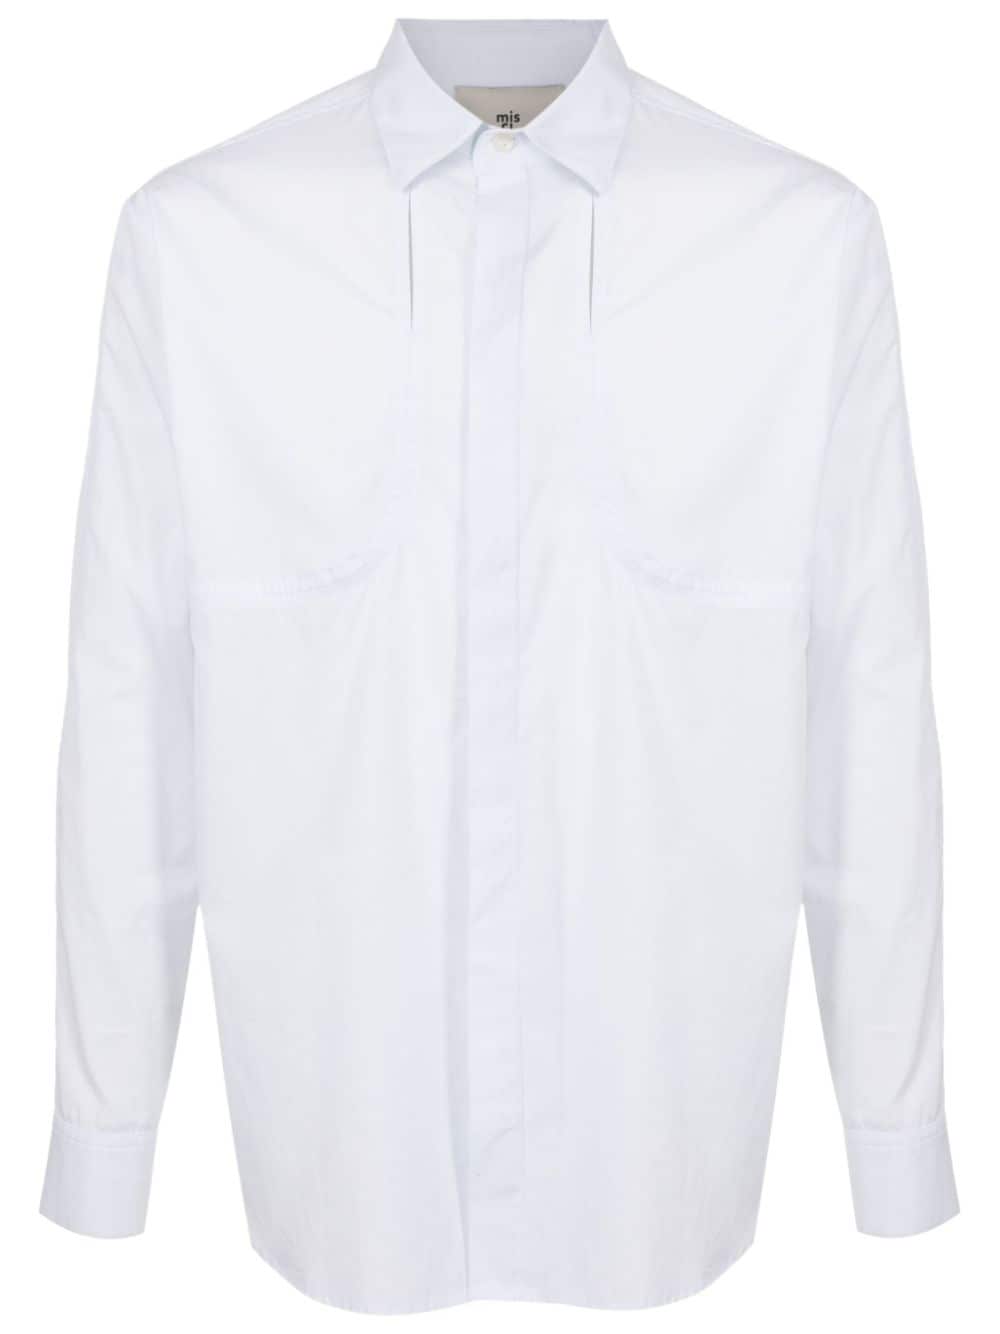 MISCI cut-out long-sleeved shirt - White von MISCI